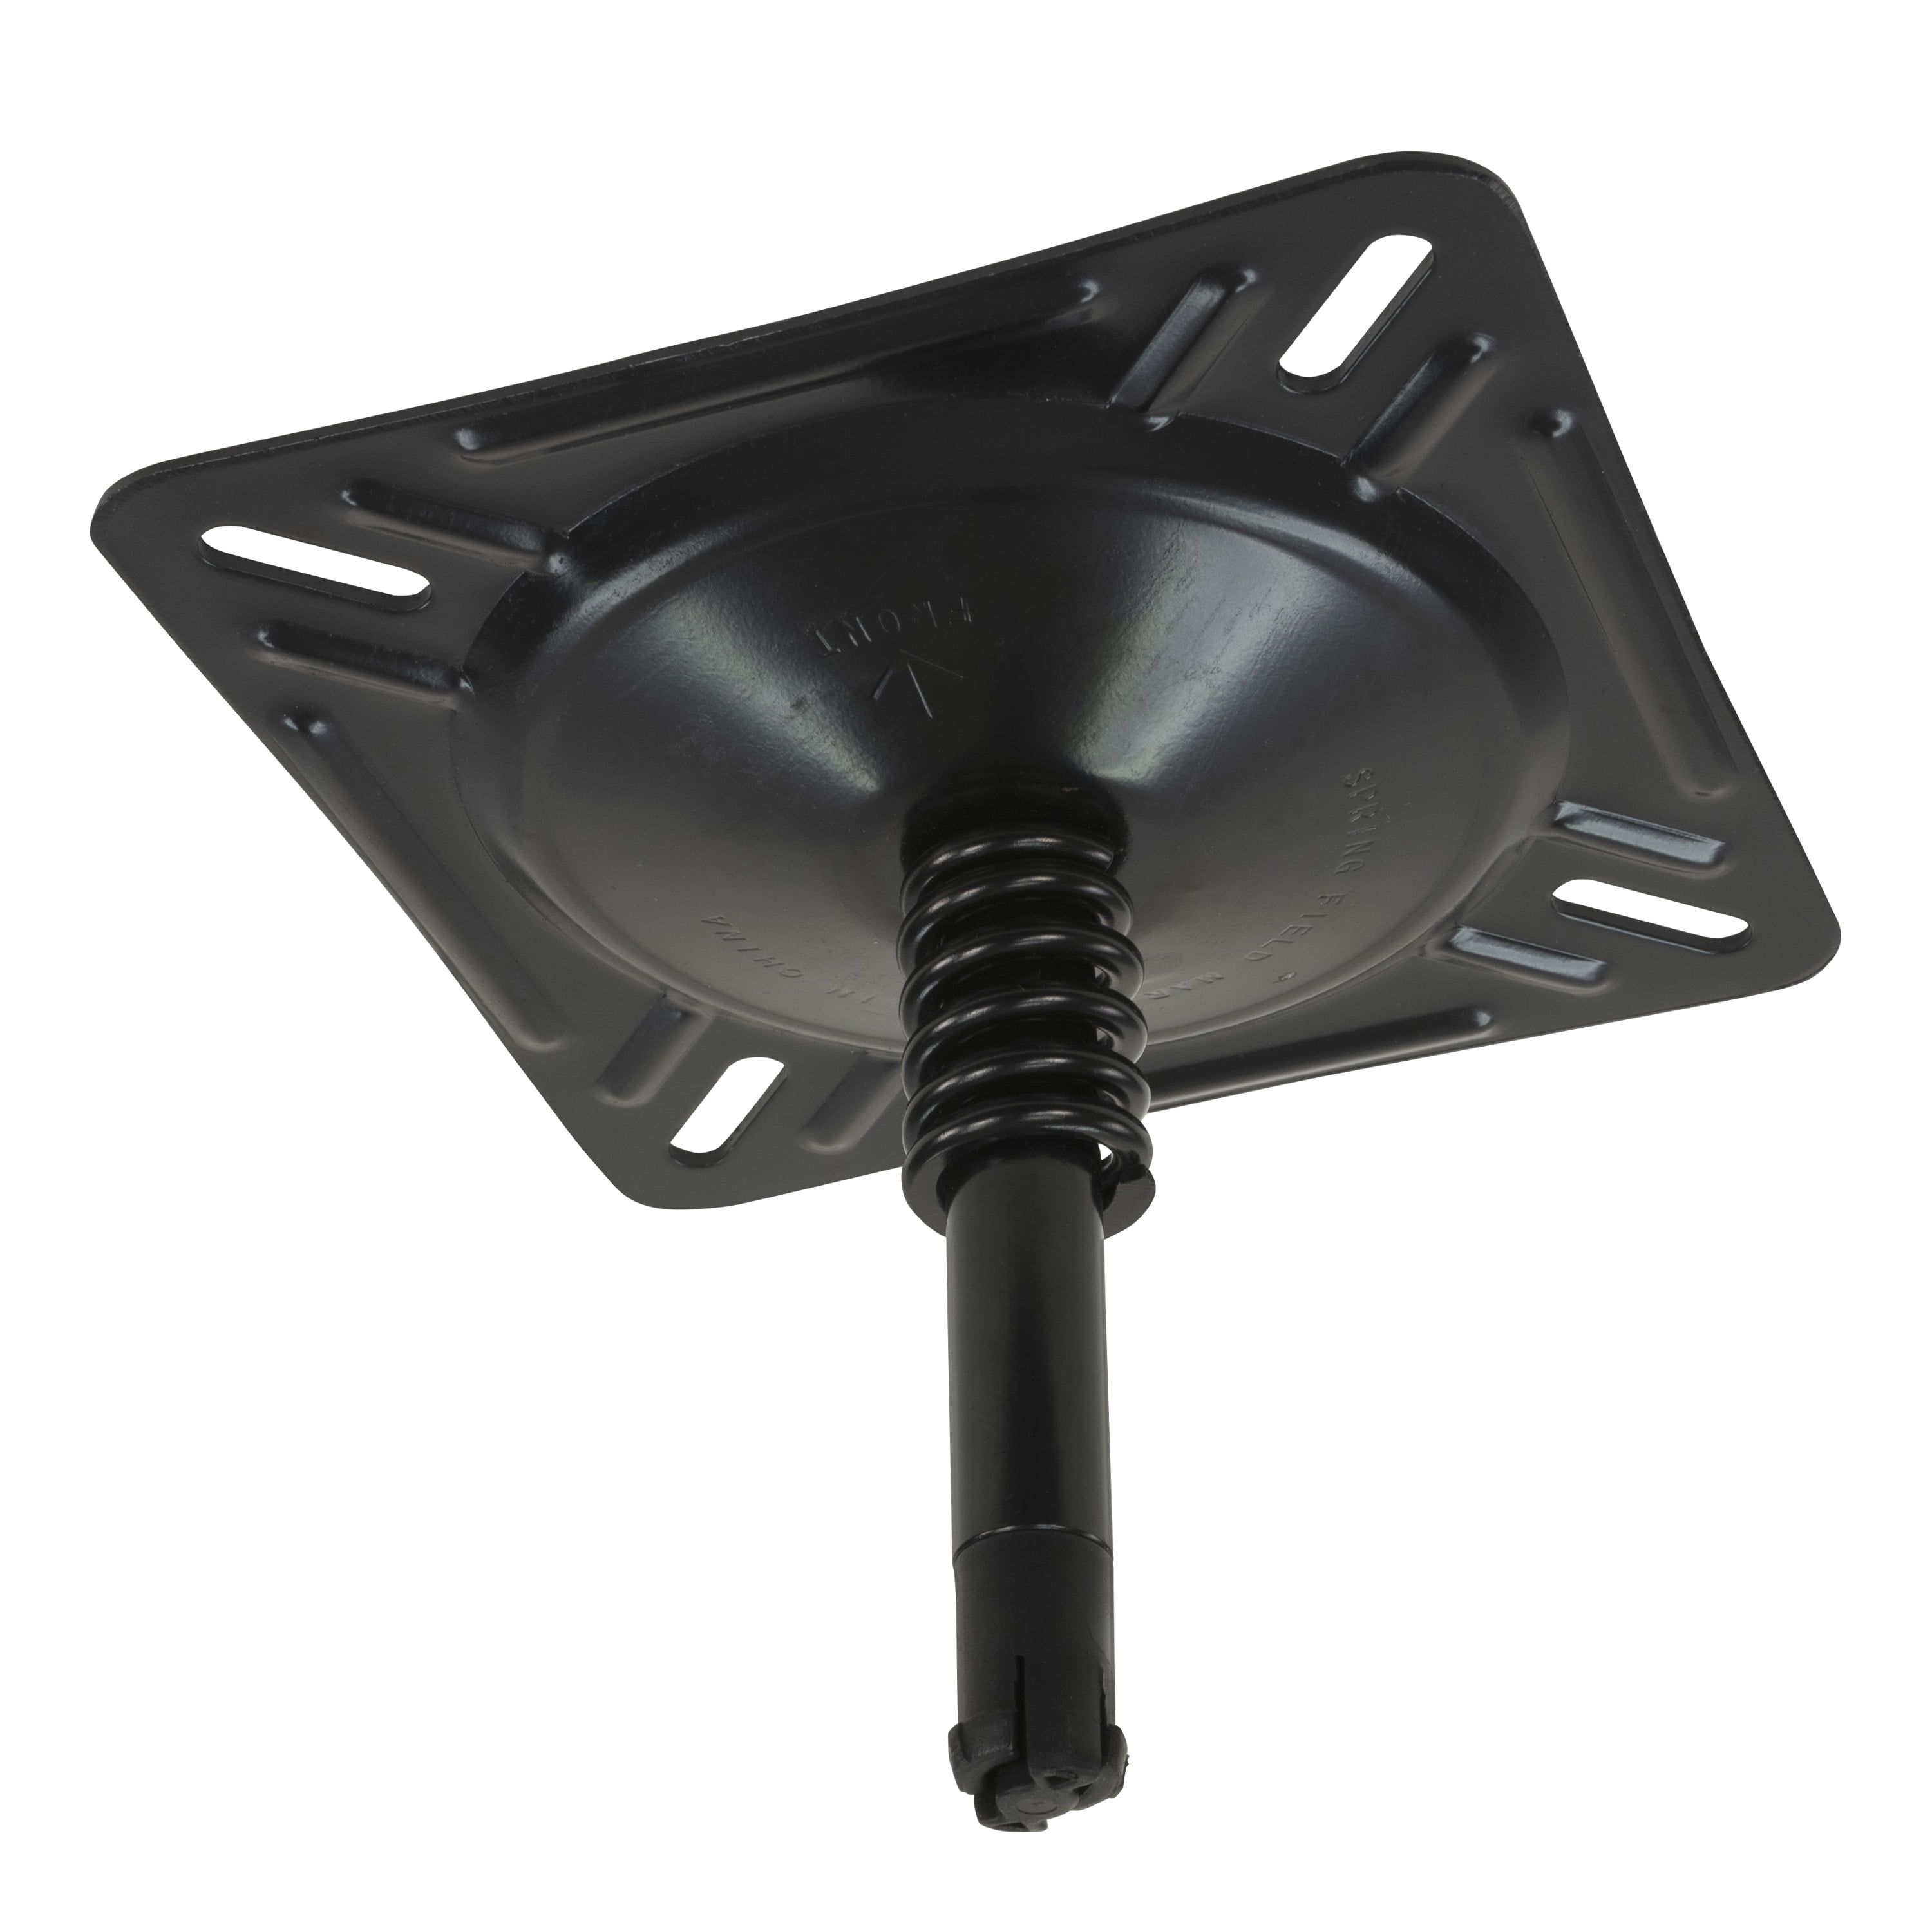 Springfield Marine Kingpin Swivel Boat Seat Mount with Spring for